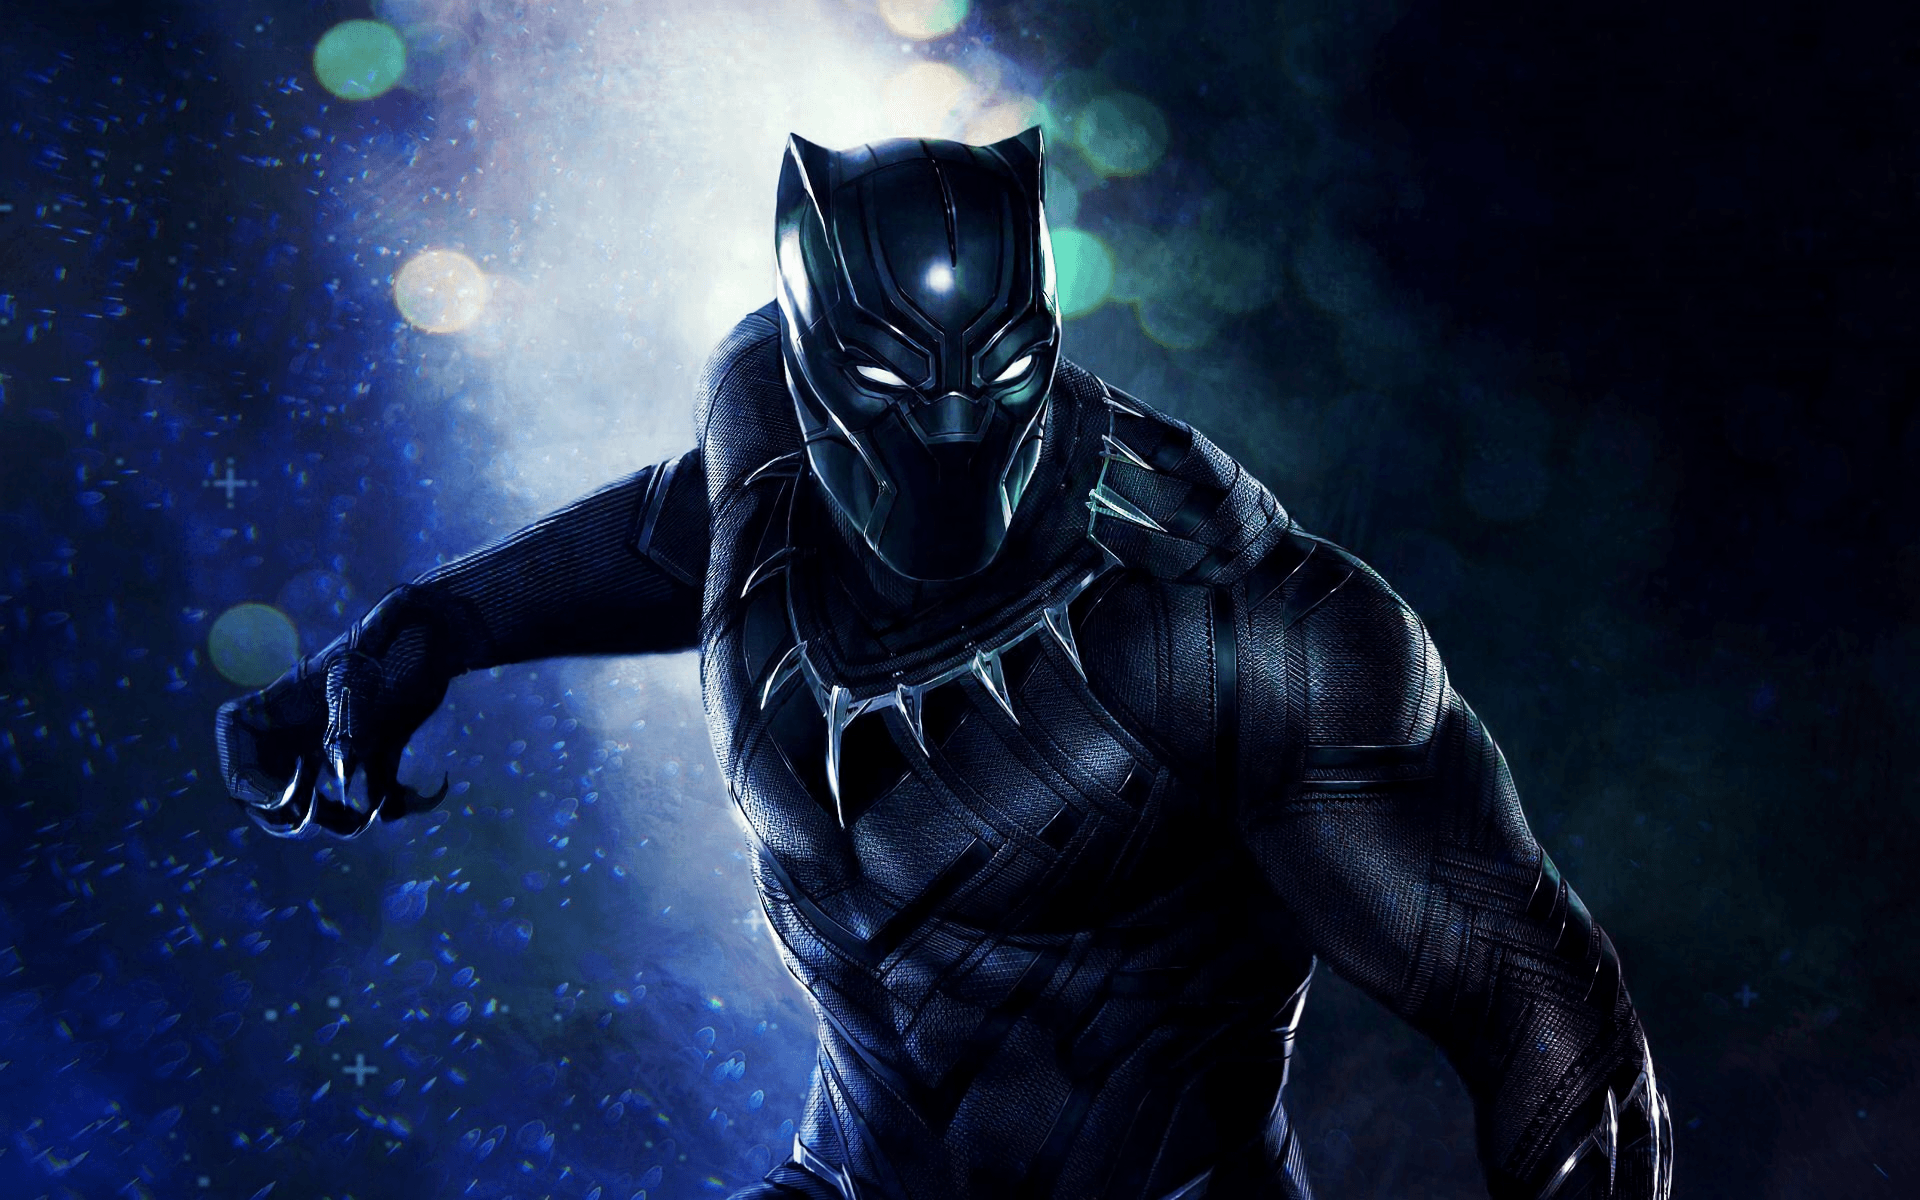 The Black Panther has a son?